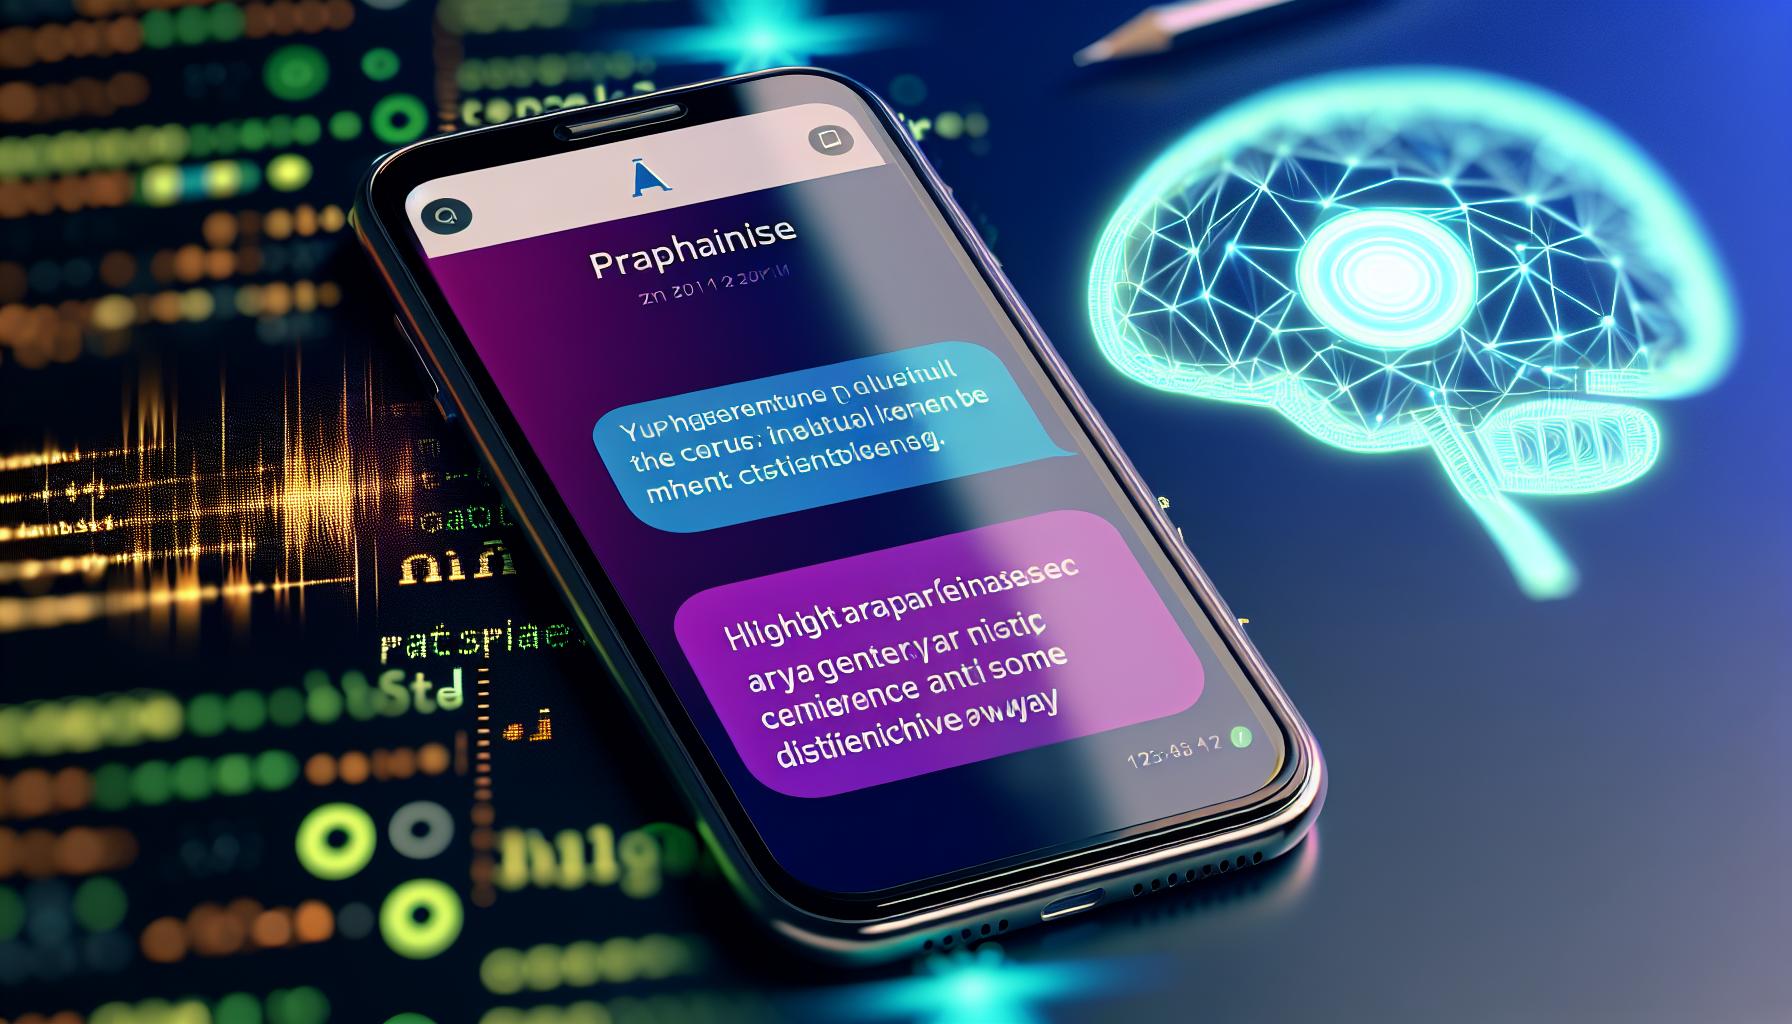 The Art of Paraphrasing on iPhone Made Easy with AIType --- Explain how AIType assists in paraphrasing text on iPhones, making writing more efficient.